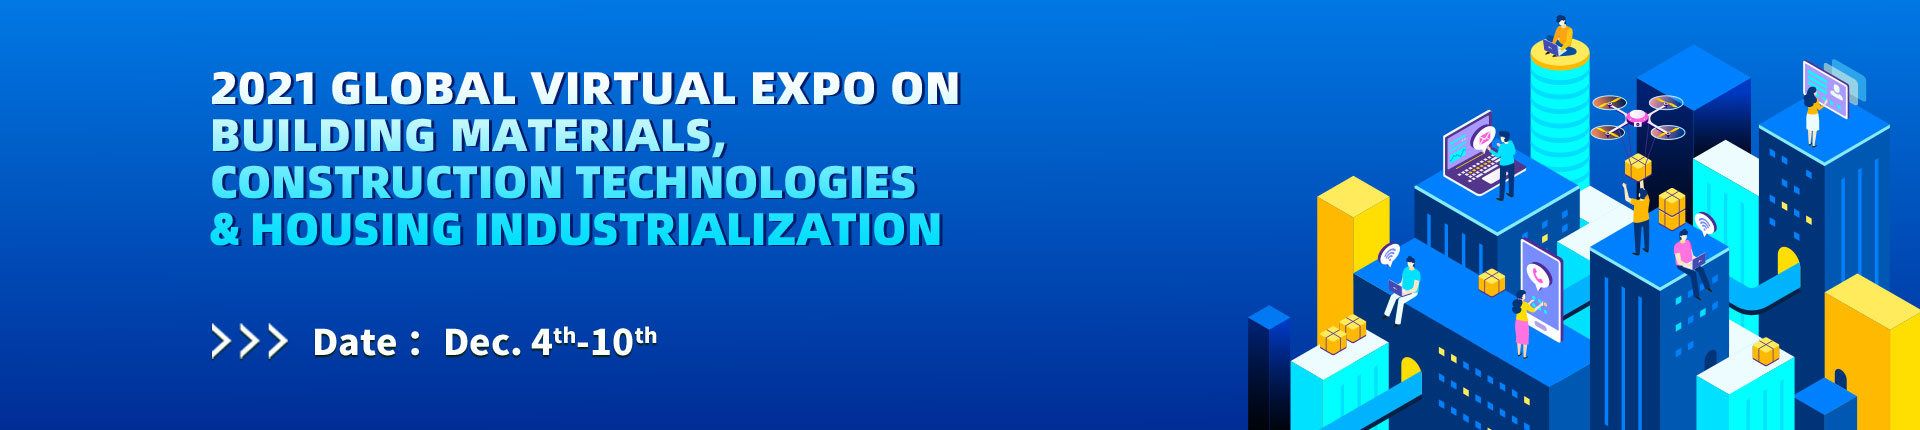 2021 Global Virtual Expo on Building Materials, Construction Technologies & Housing Industrialization